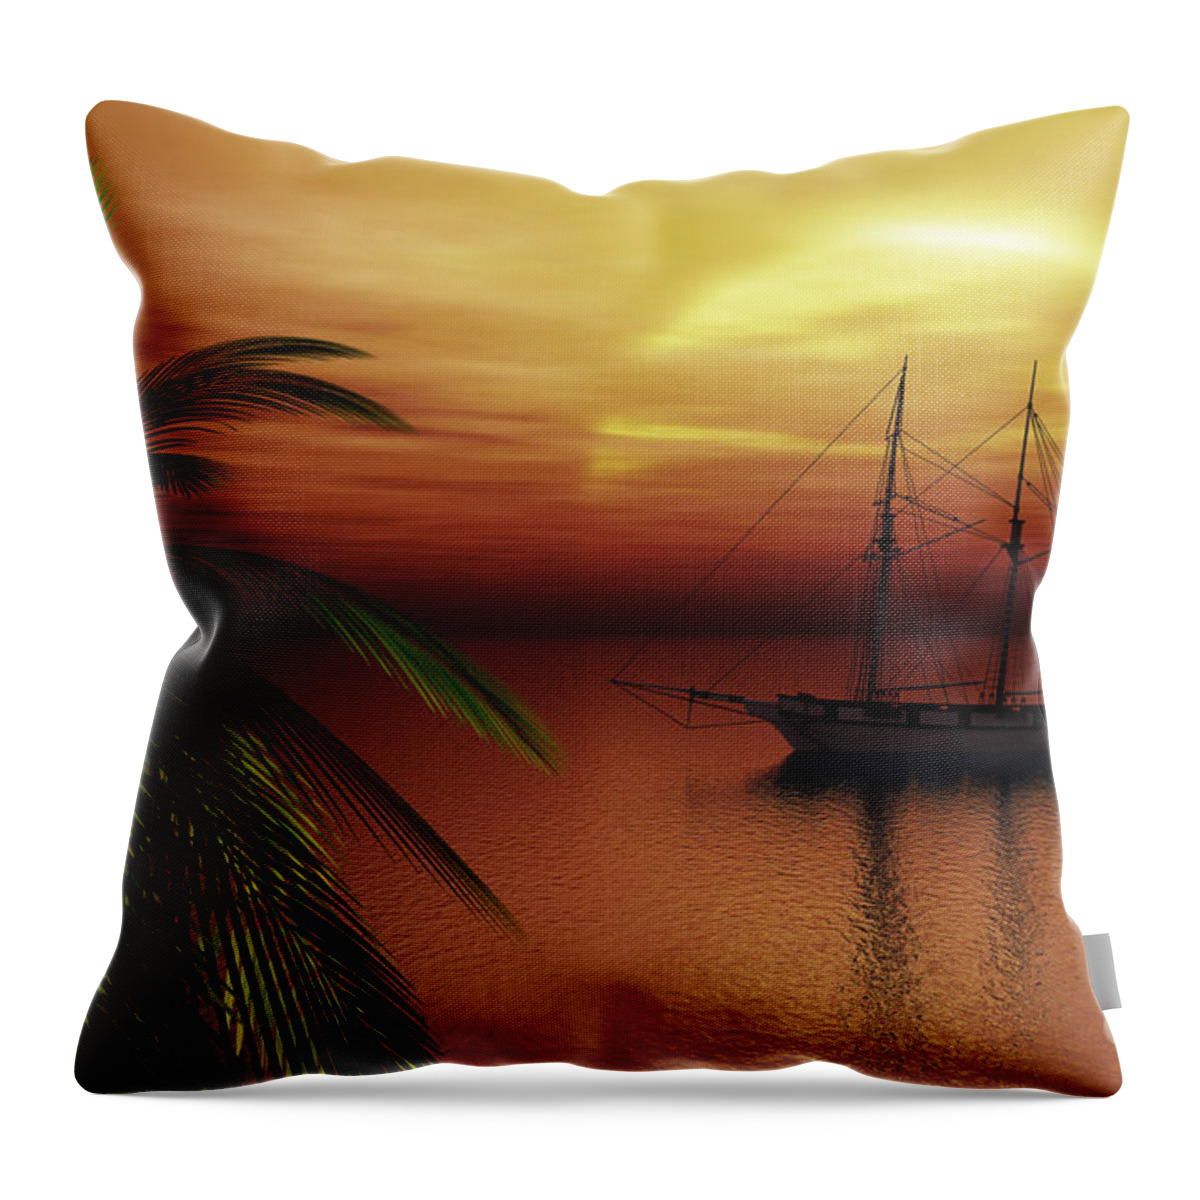 Tropical Throw Pillow featuring the digital art Island Explorer by Richard Rizzo